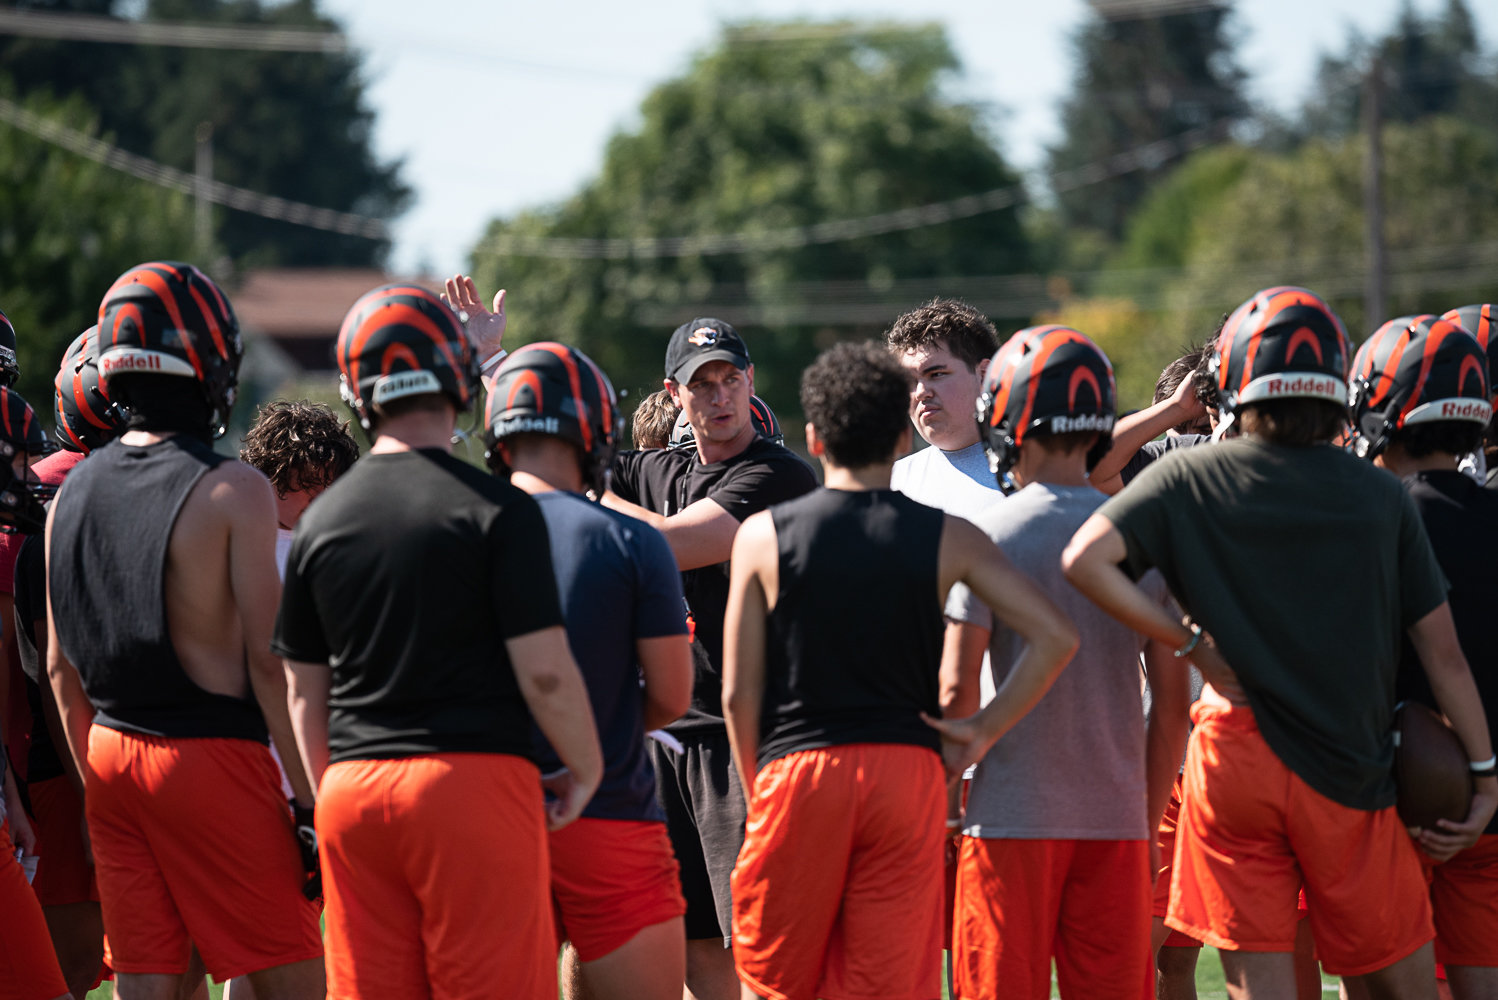 Centralia head coach Dustin McGee talks with his team in a huddle during the first practice of fall camp Aug. 17 at Tiger Stadium.